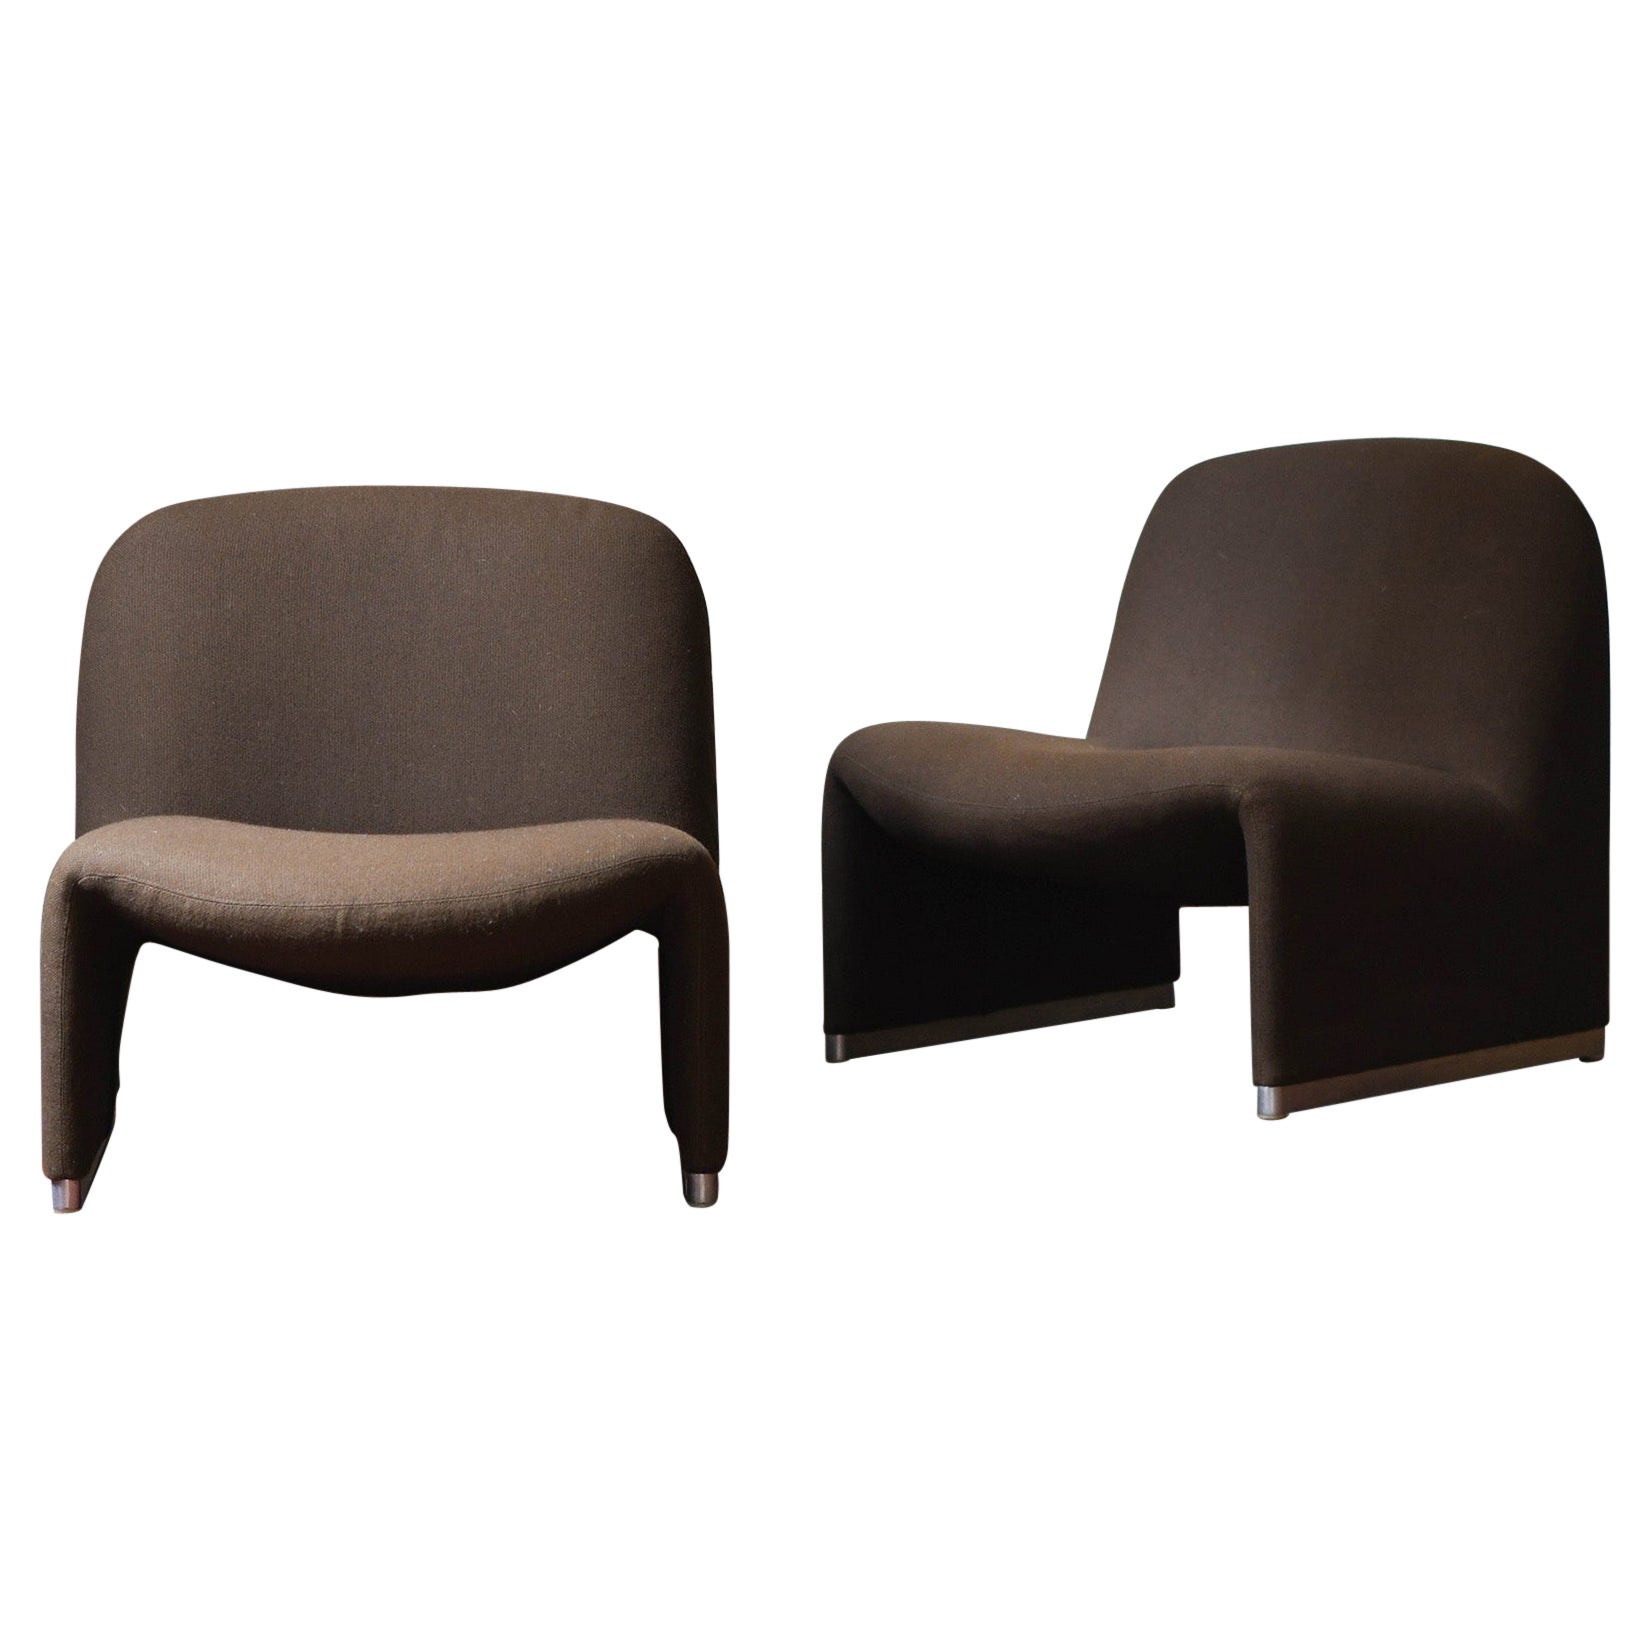 Pair of Alky armchairs by Giancarlo Piretti for Castelli, 1970 For Sale